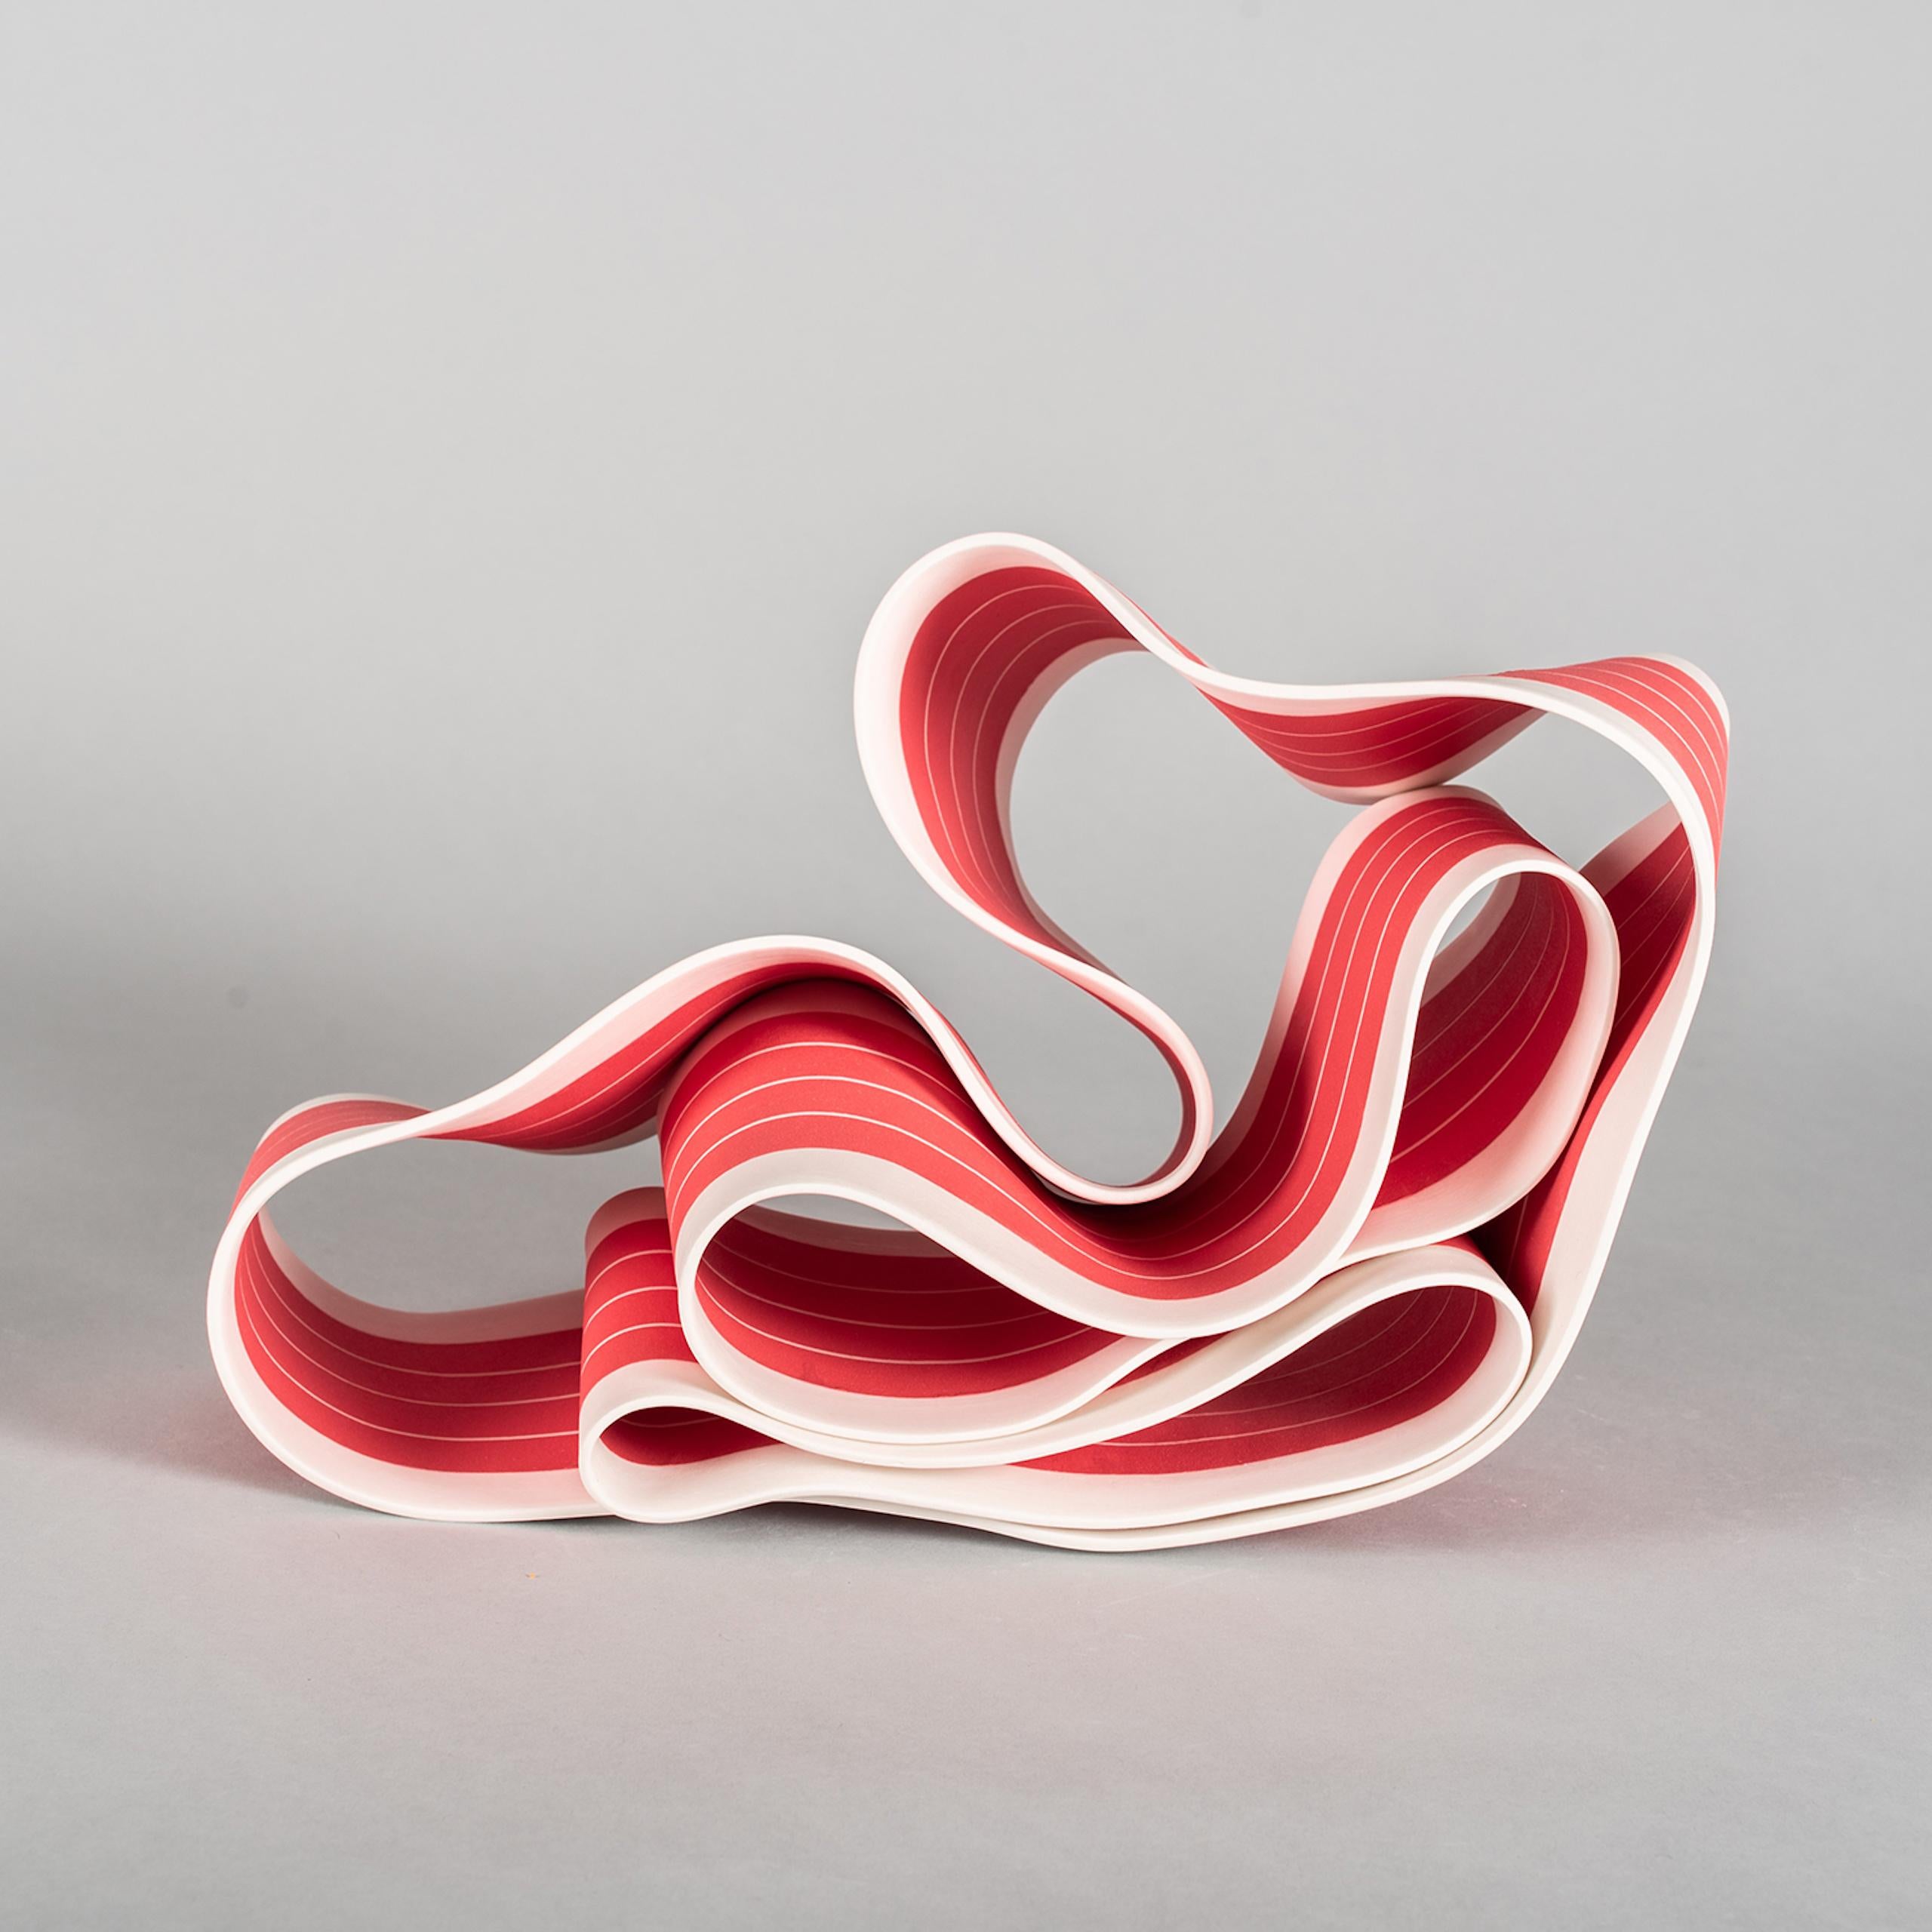 Folding in Motion 3 by Simcha Even-Chen - porcelain sculpture, red For Sale 1